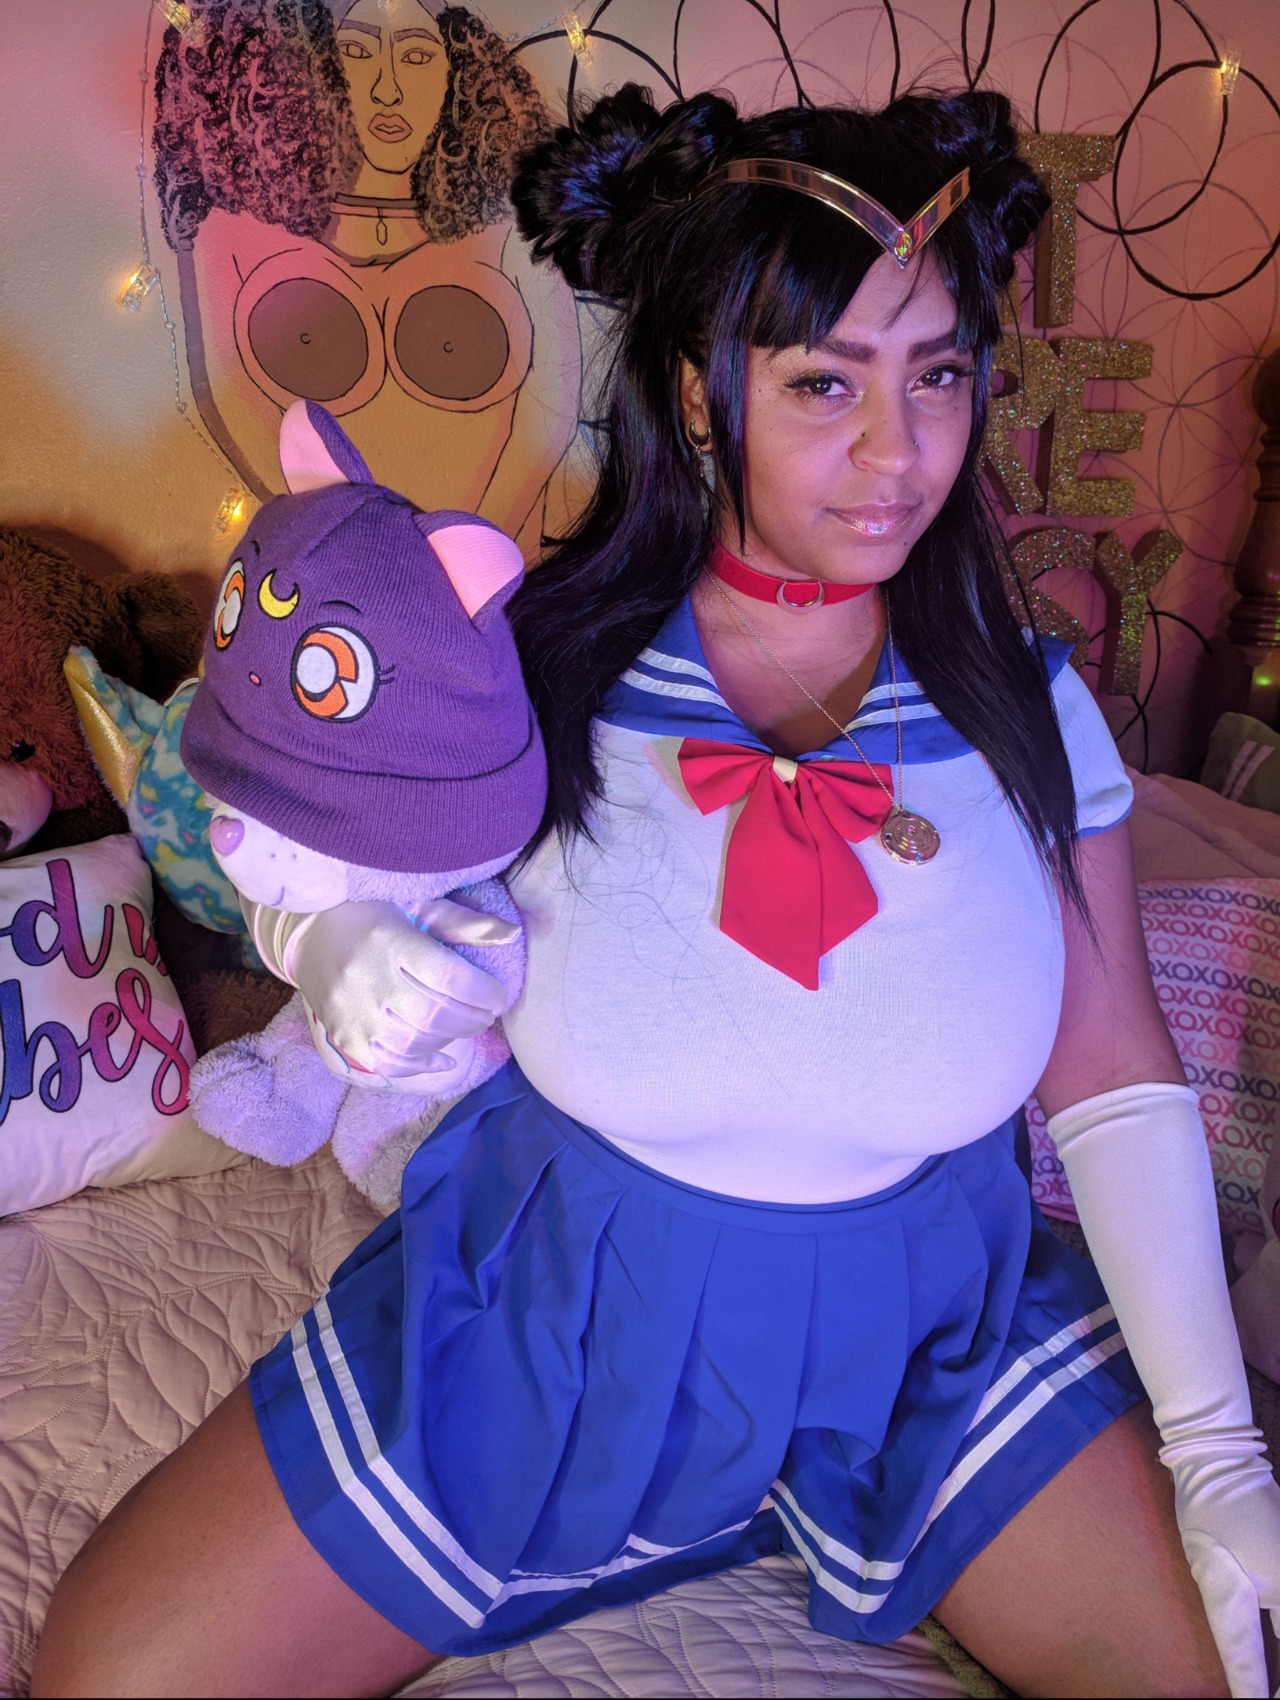 fantasyfriday: She is the one, Sailor Moon adult photos